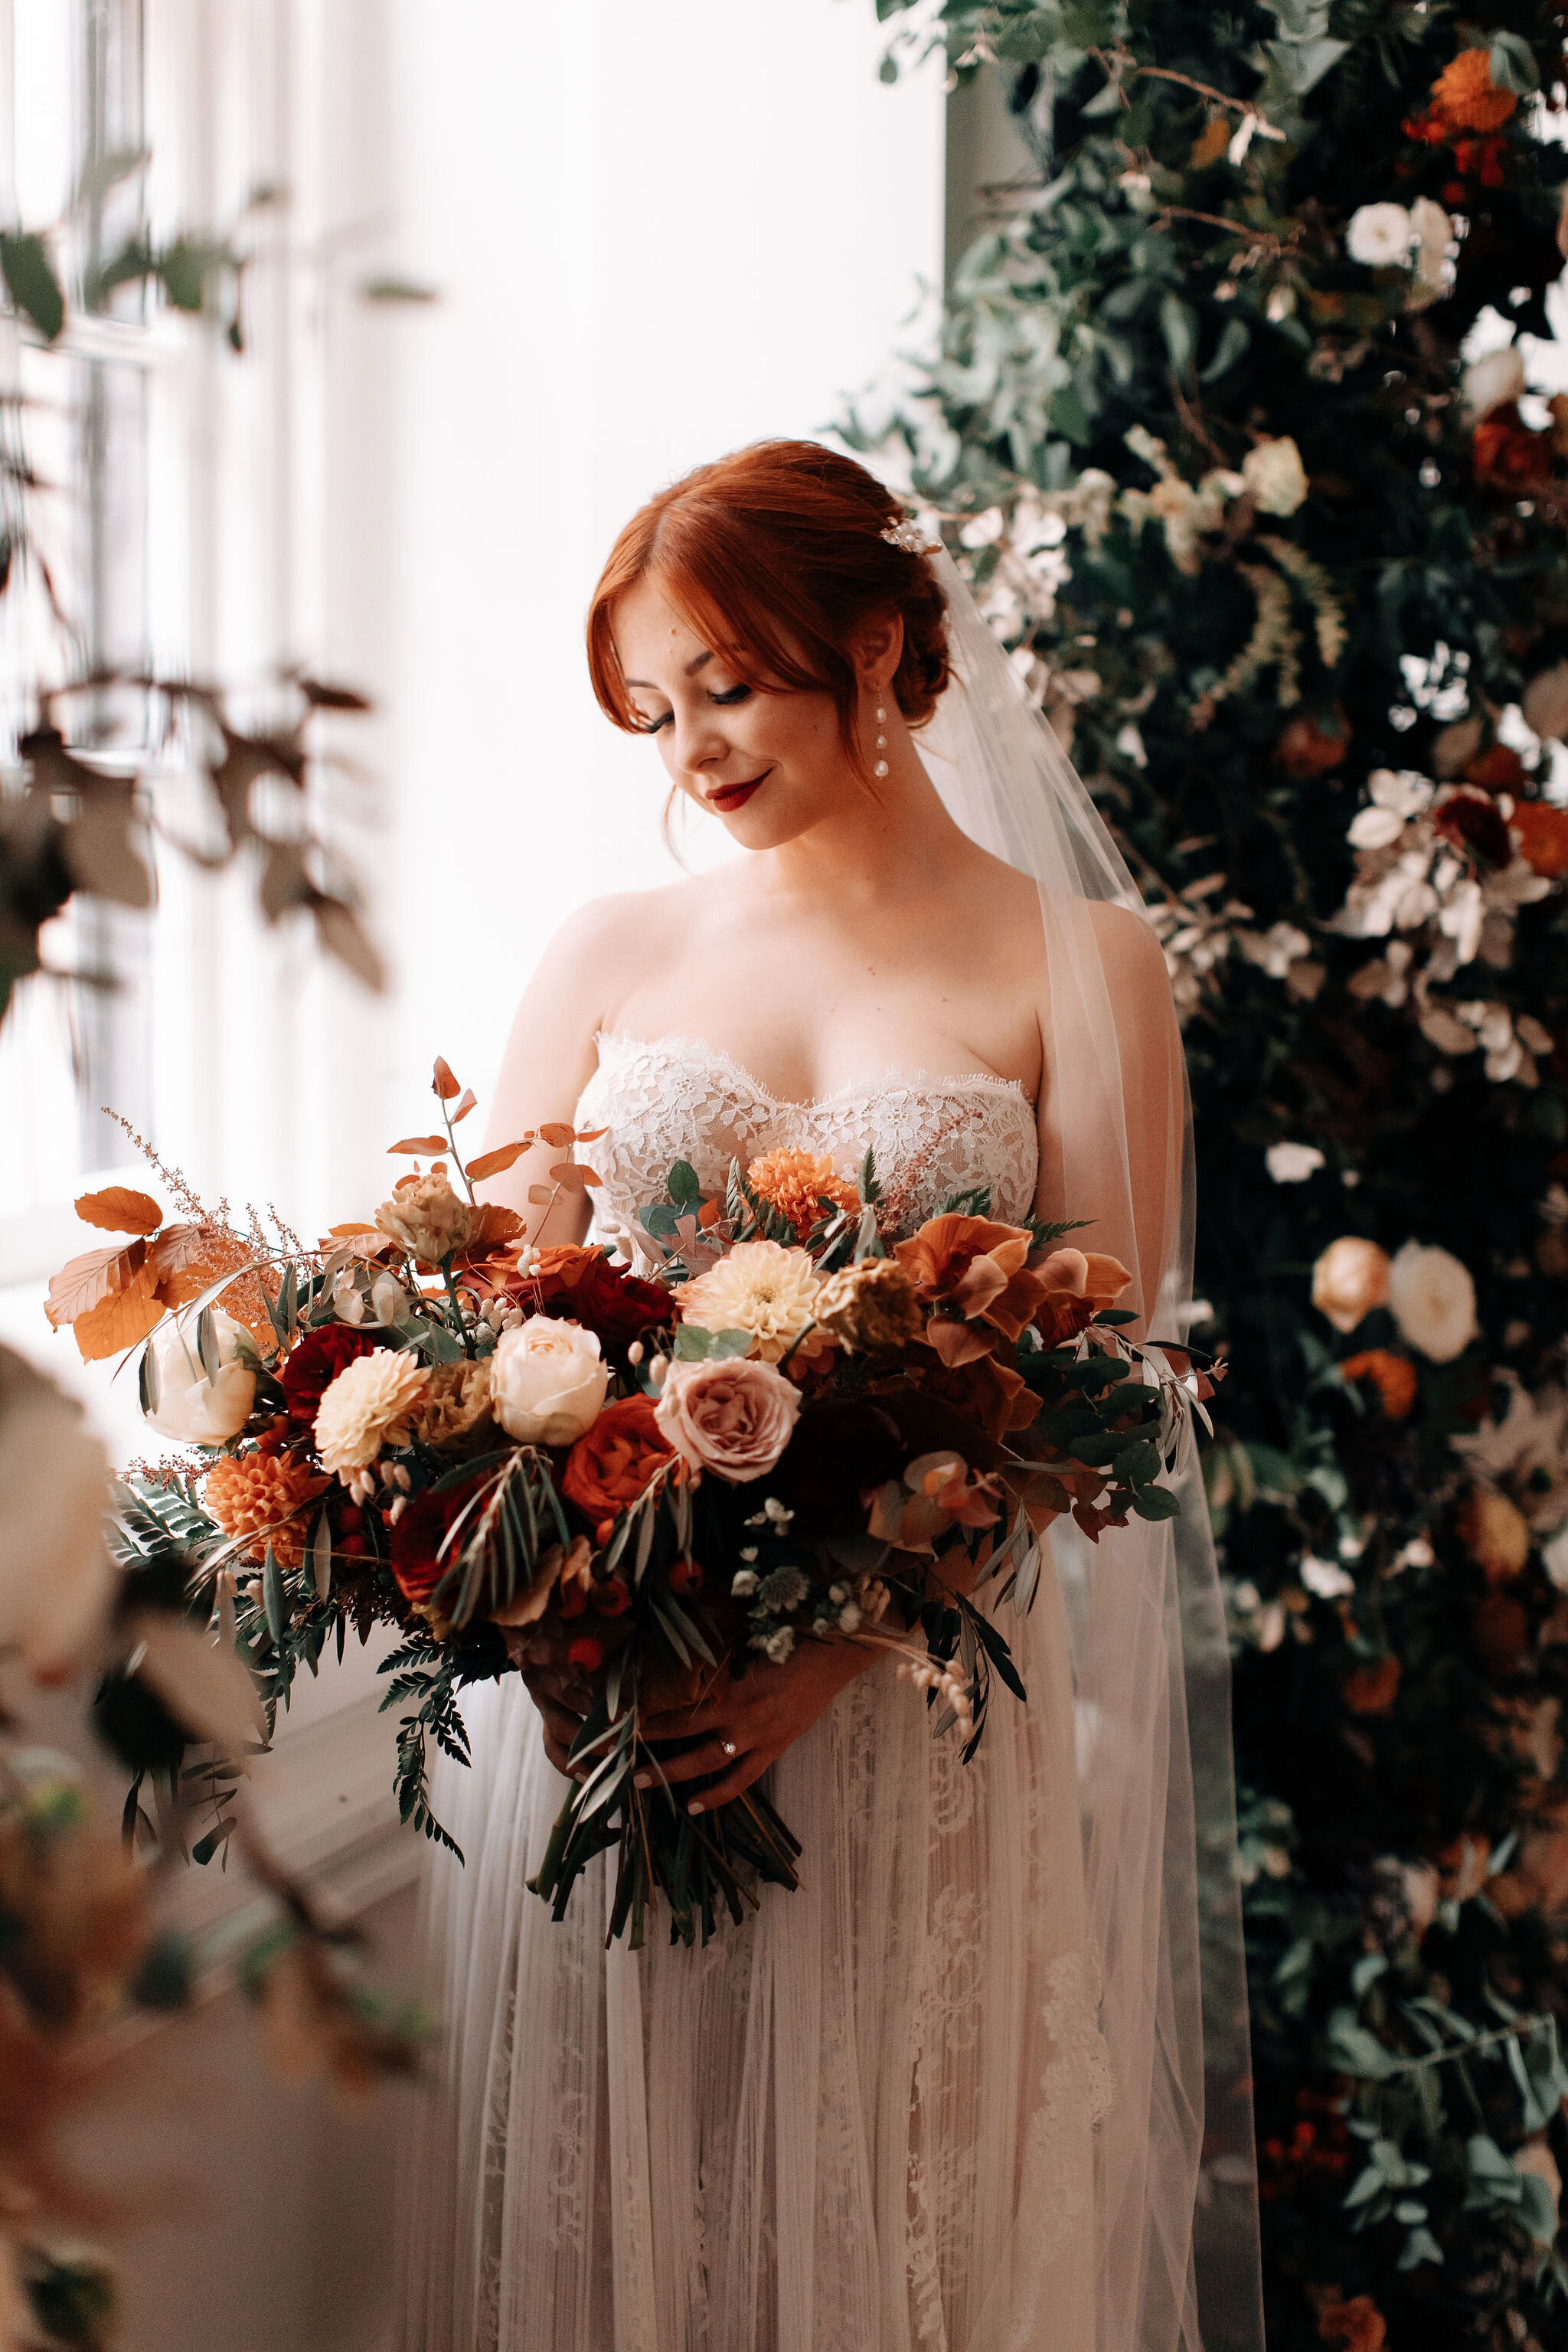 Bridal bouquet in shades of burnt orange, rust, burgundy, copper, and greenery, with dahlias, ranunculus, rosehips, and olive branches. Nashville wedding floral designer.